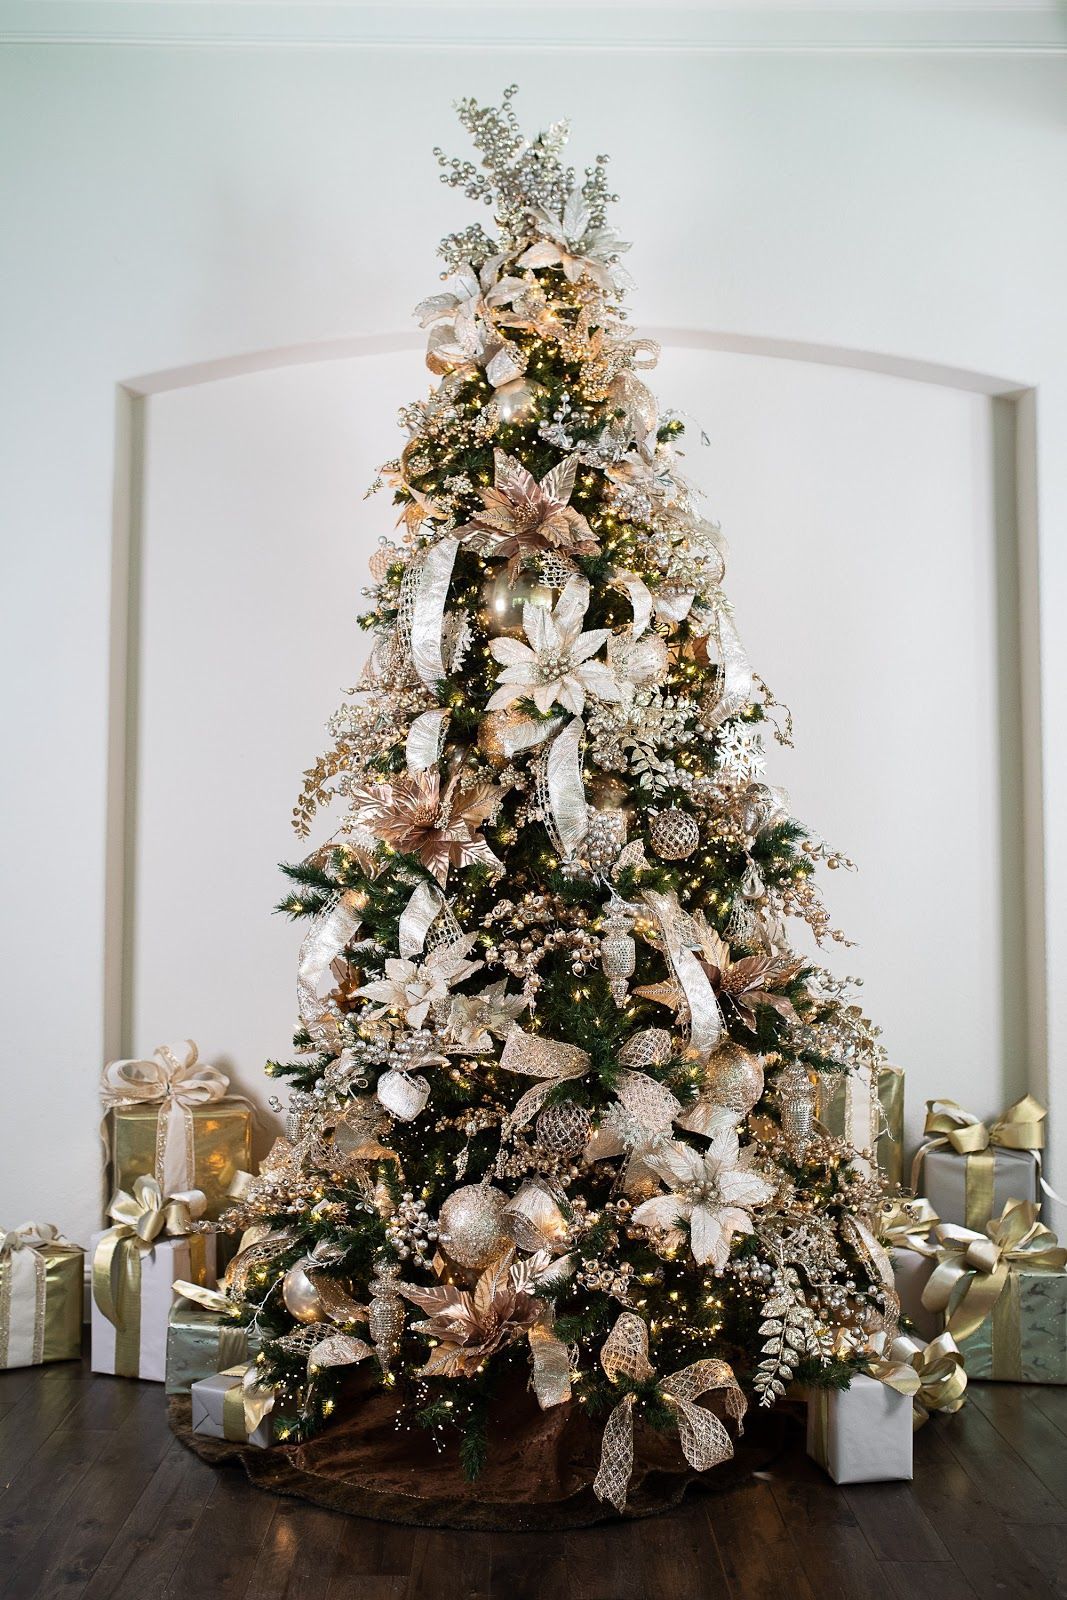 Top Trends in Christmas Home Decor for 2020 - Top Trends in Christmas Home Decor for 2020 -   17 christmas tree decor 2020 ideas